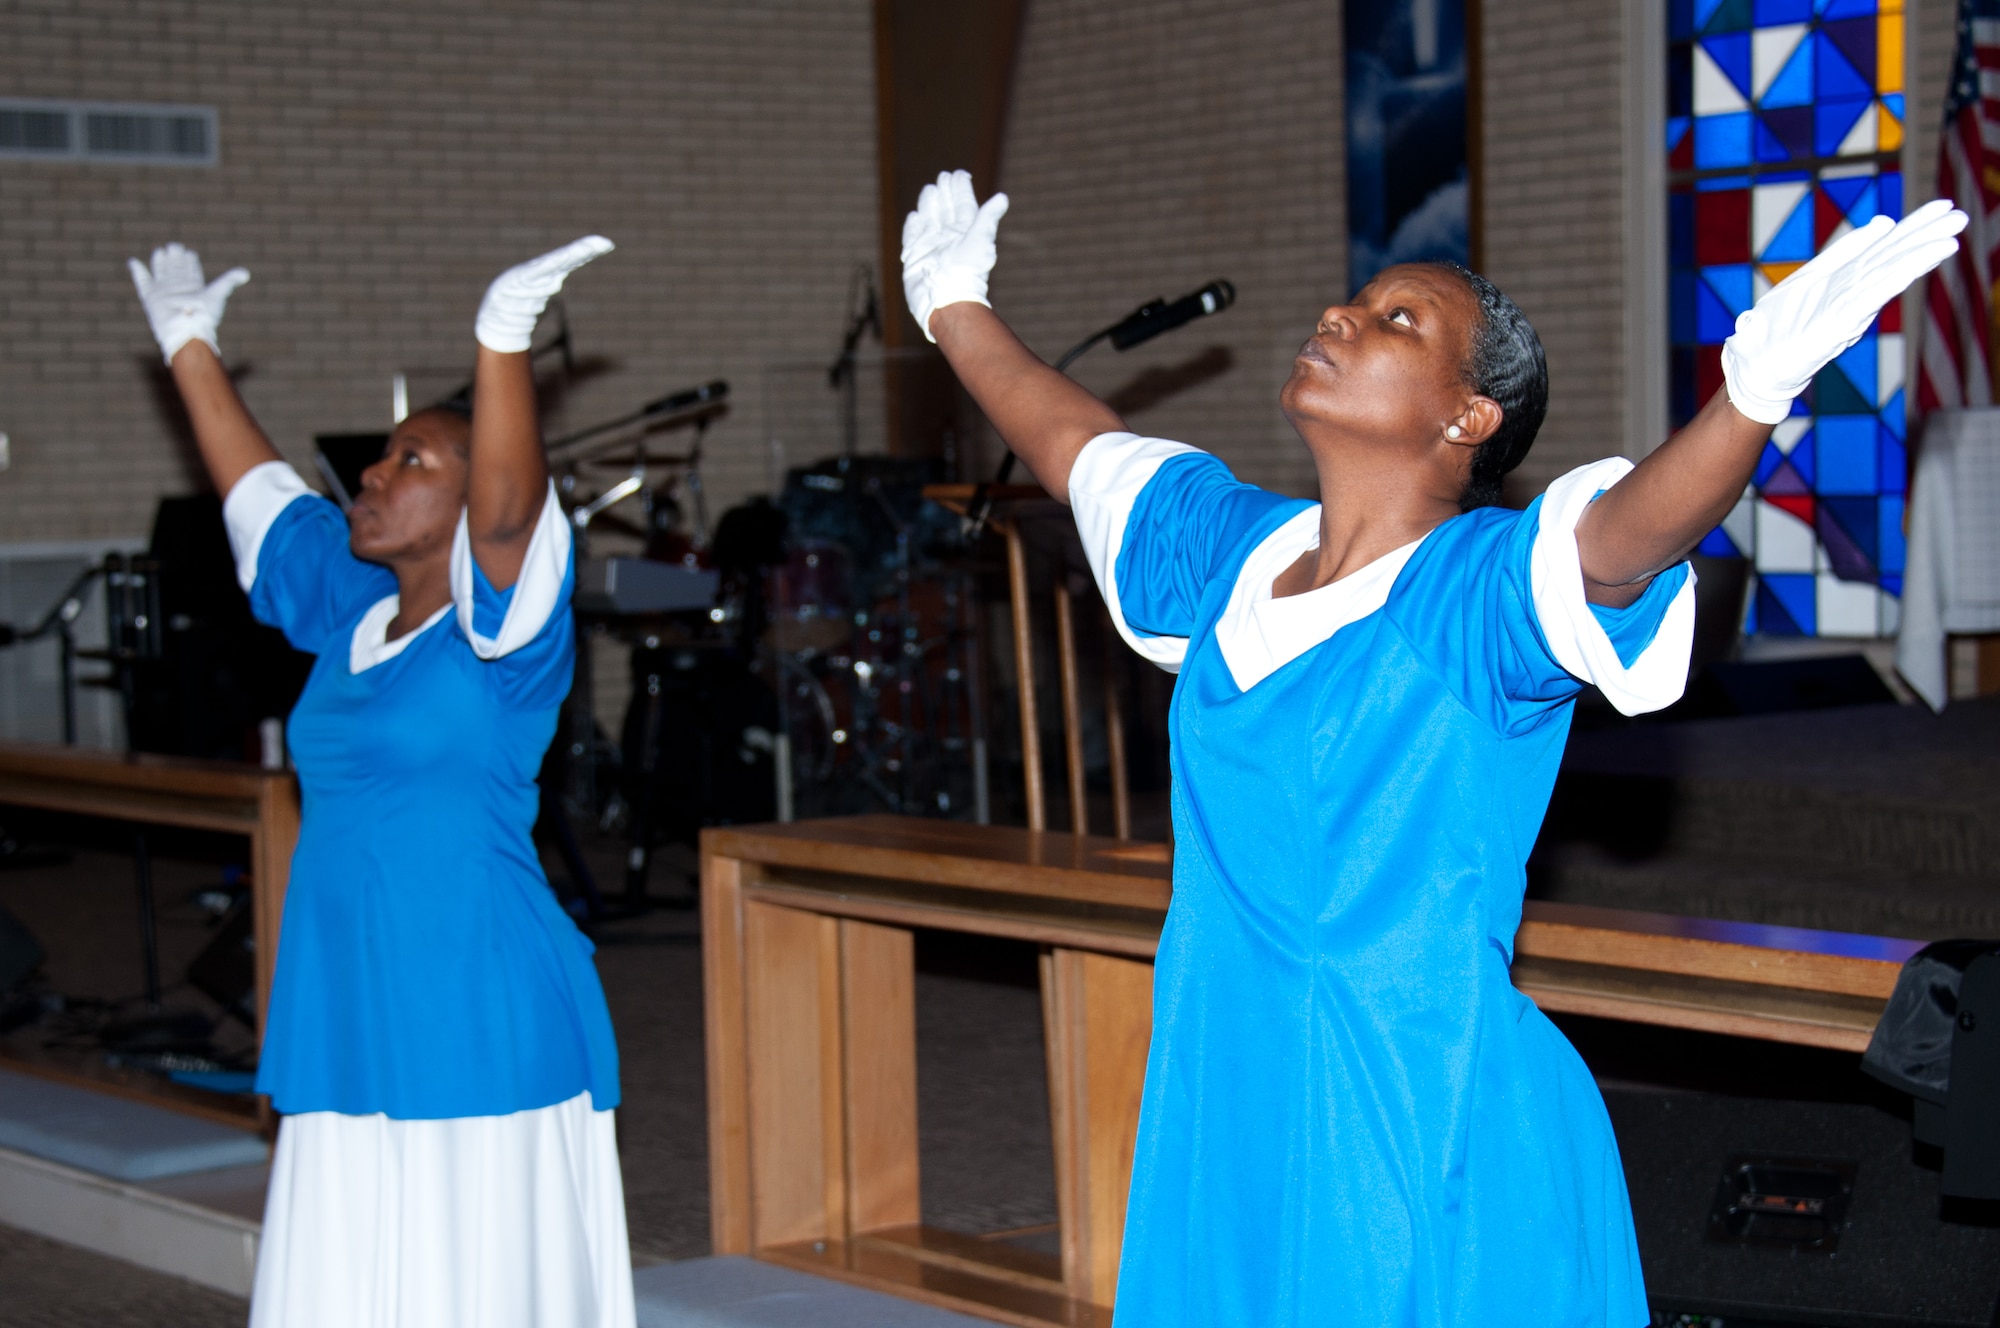 A praise dance group performed at a base celebration of Martin Luther King's legacy Jan. 18. Maxwell chapel held a memorial service for Martin Luther King Jr., celebrating the life and work of the famous civil rights activist. (Air Force photo/Melanie Rodgers Cox)